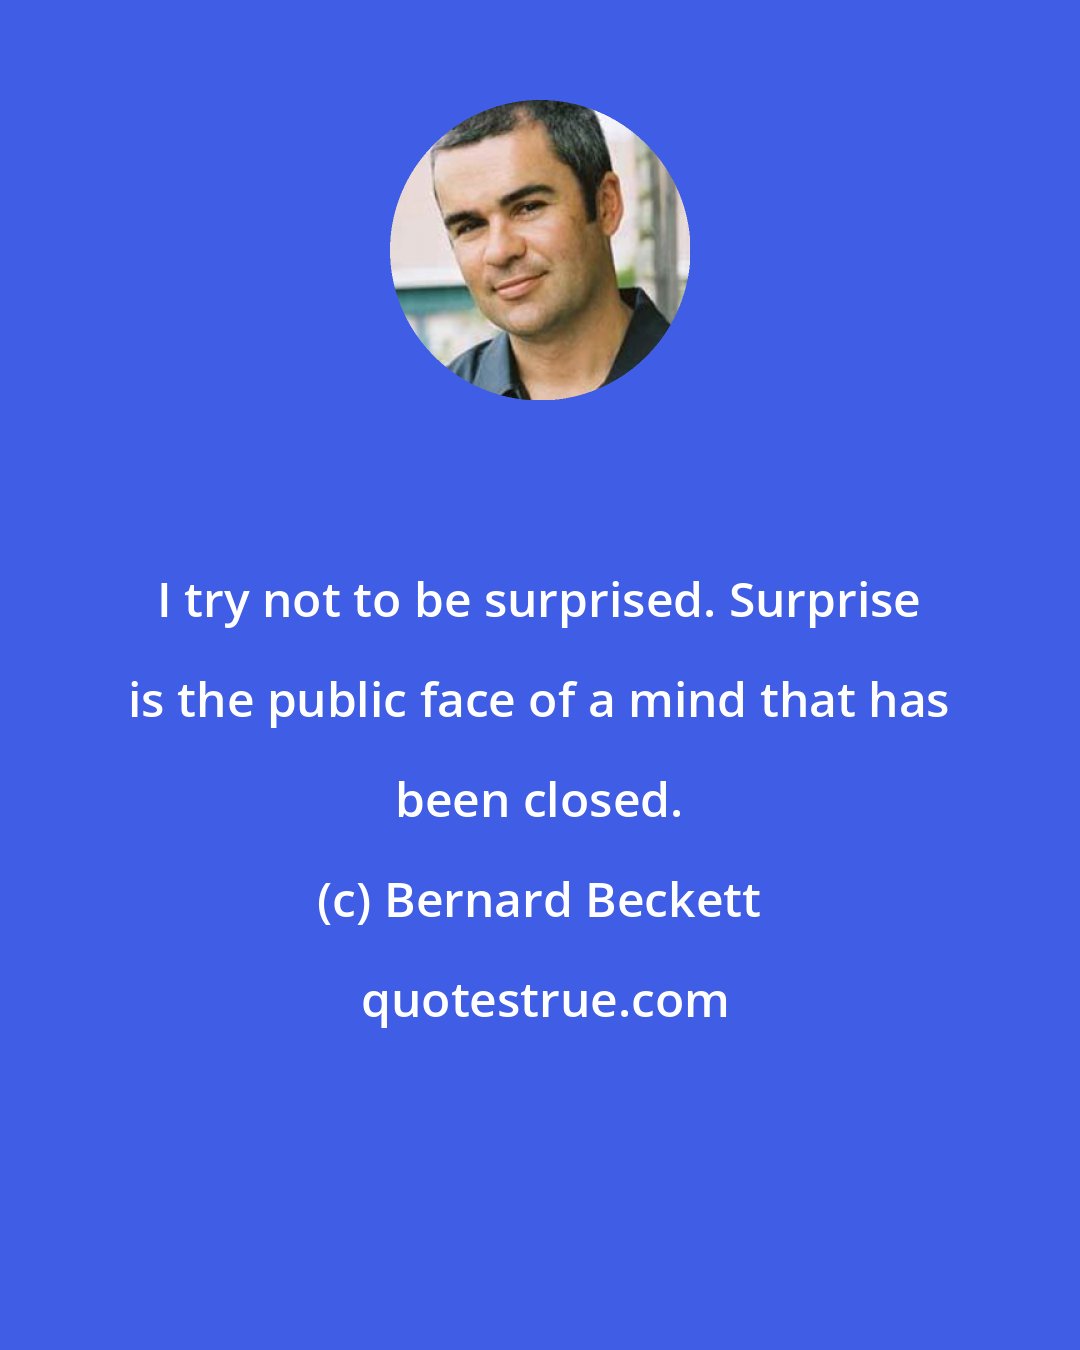 Bernard Beckett: I try not to be surprised. Surprise is the public face of a mind that has been closed.